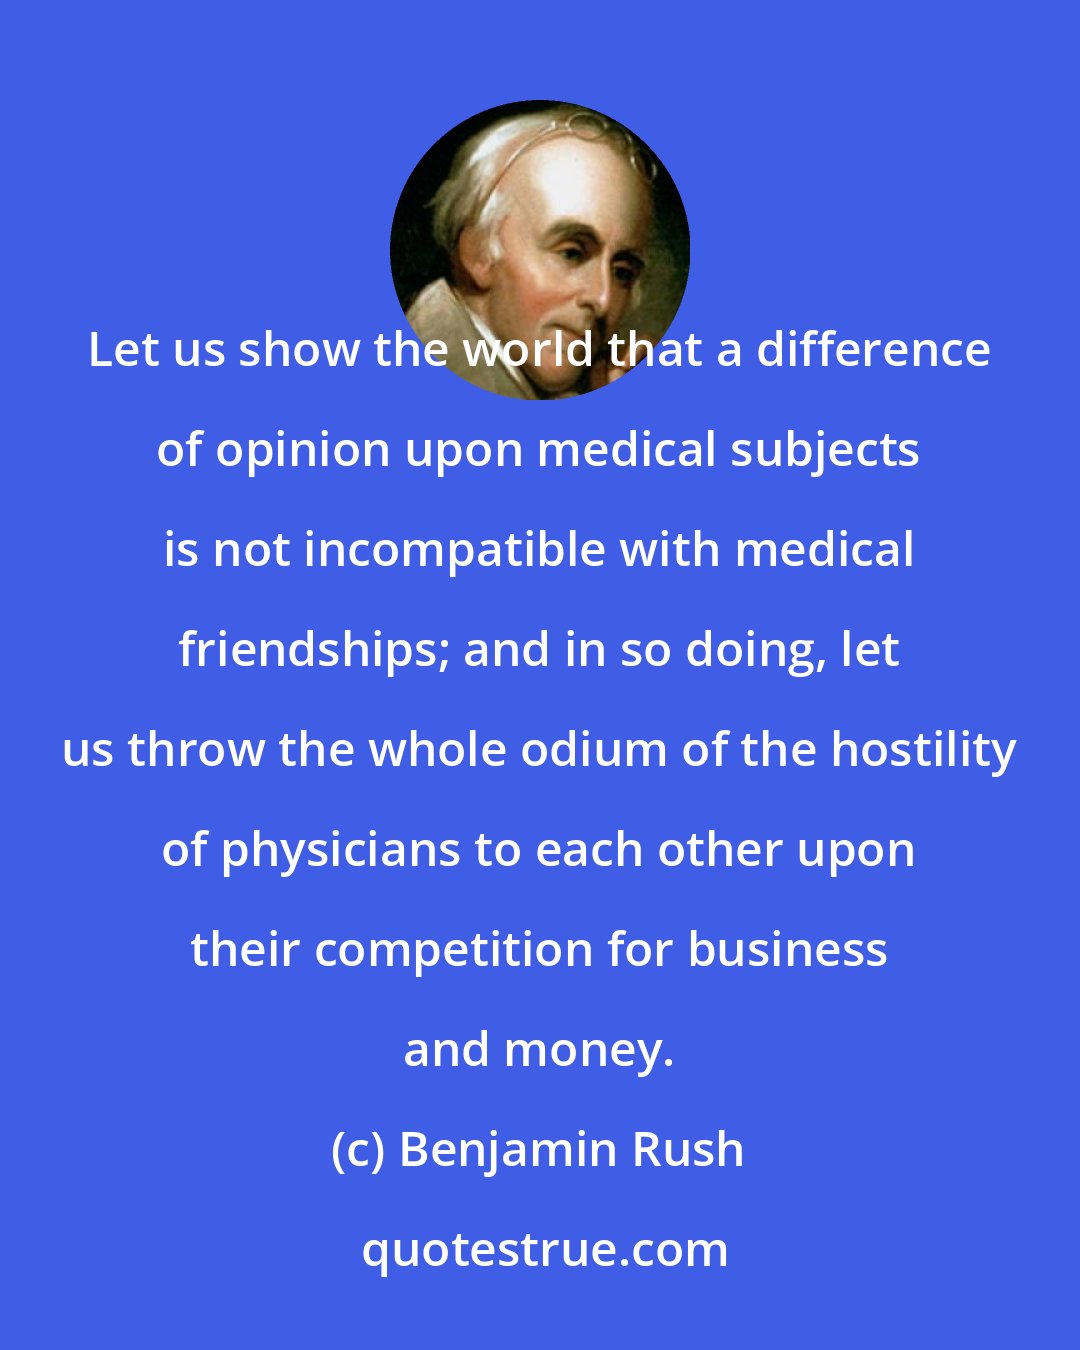 Benjamin Rush: Let us show the world that a difference of opinion upon medical subjects is not incompatible with medical friendships; and in so doing, let us throw the whole odium of the hostility of physicians to each other upon their competition for business and money.